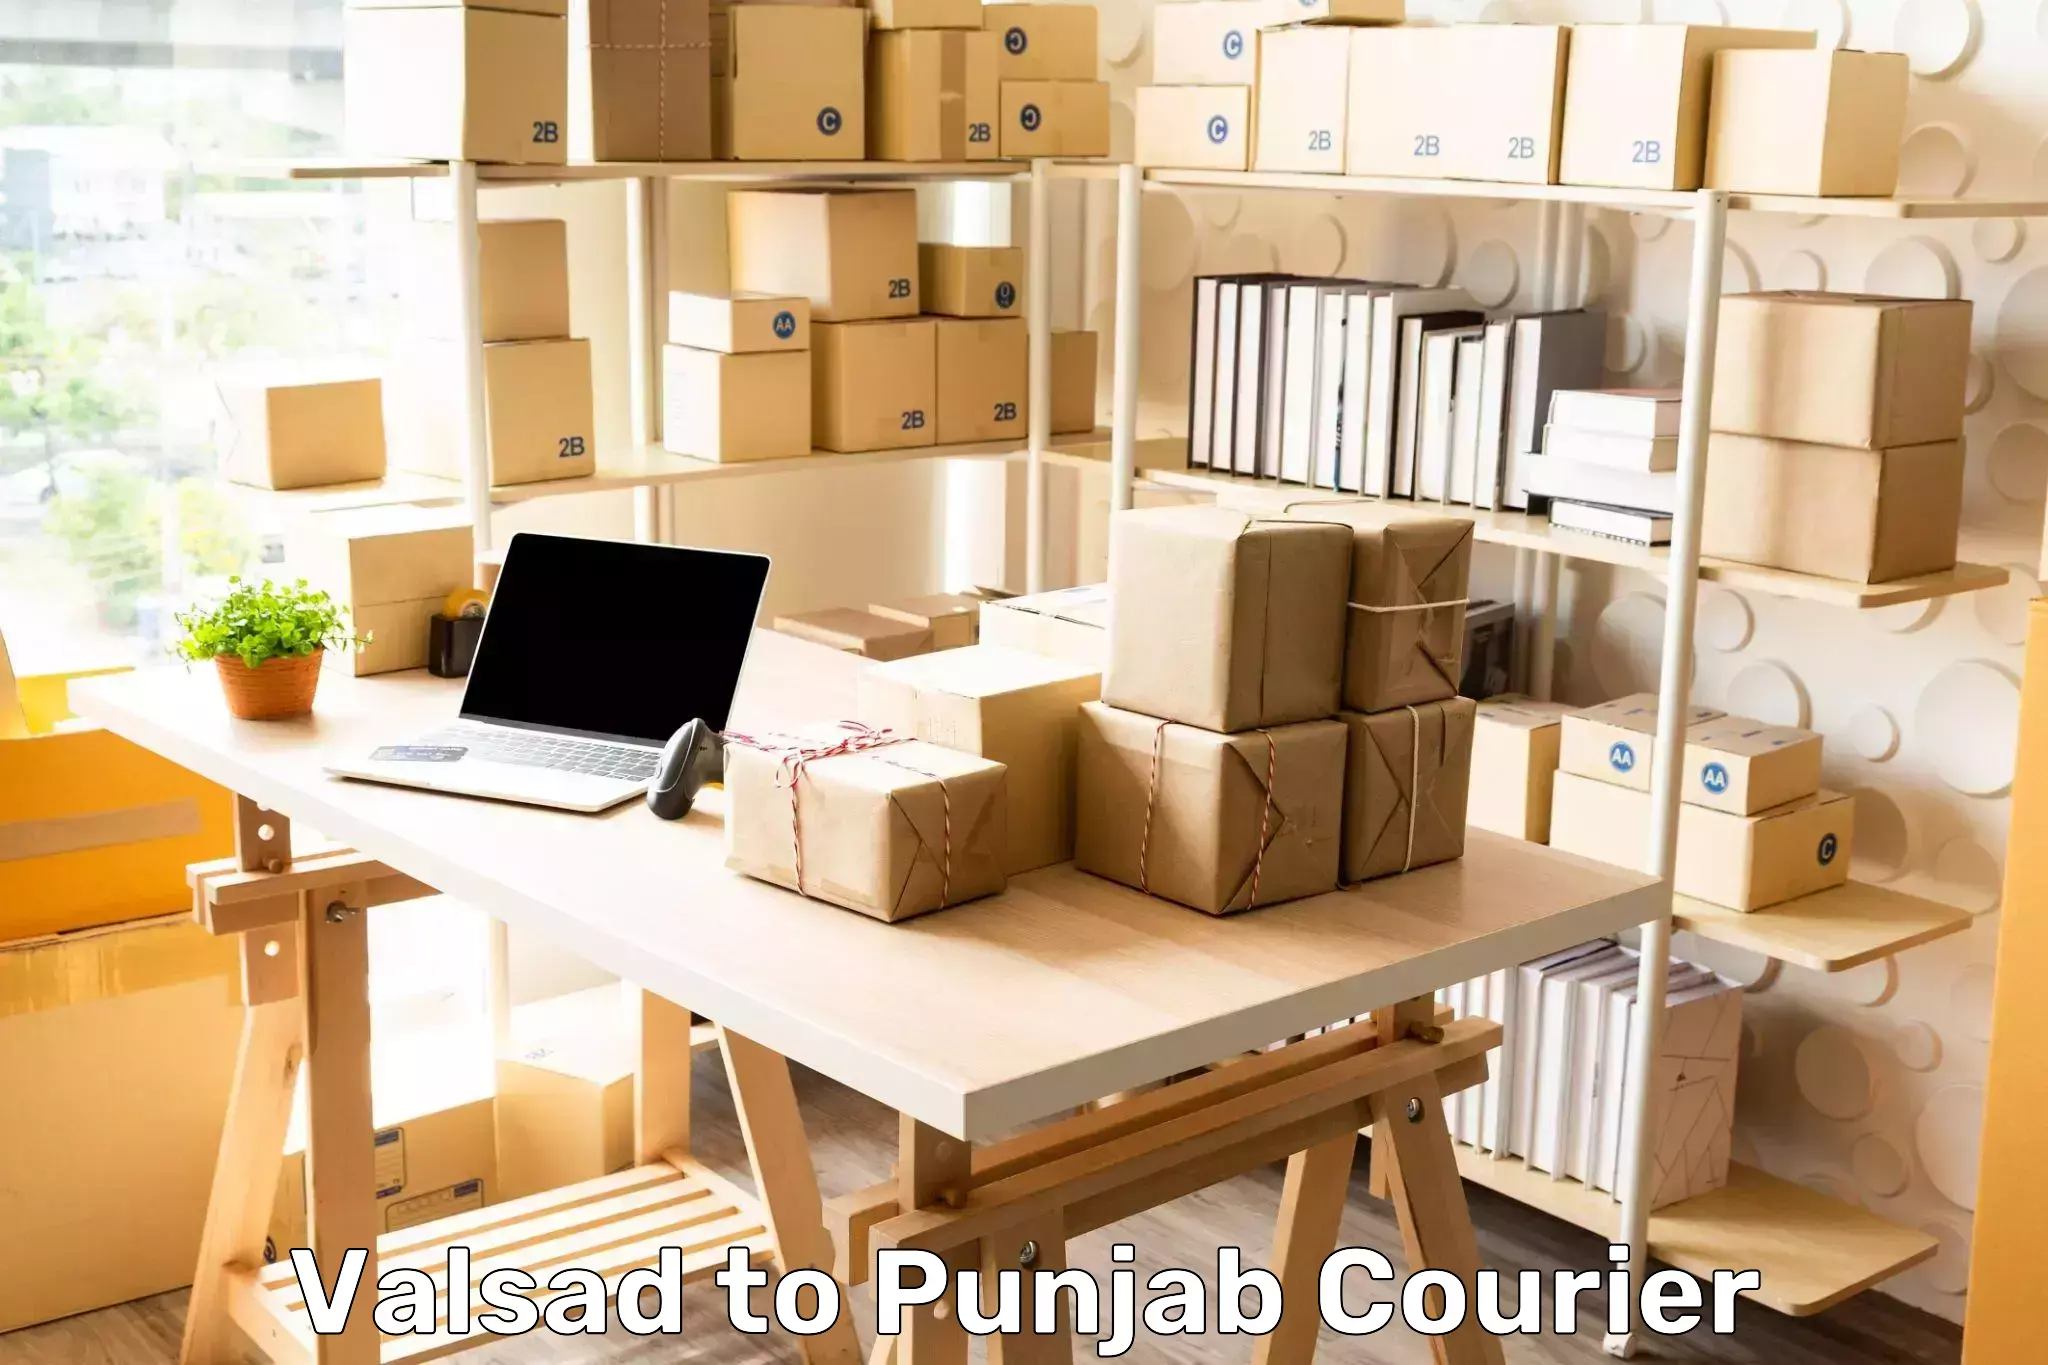 State-of-the-art courier technology Valsad to Talwandi Sabo